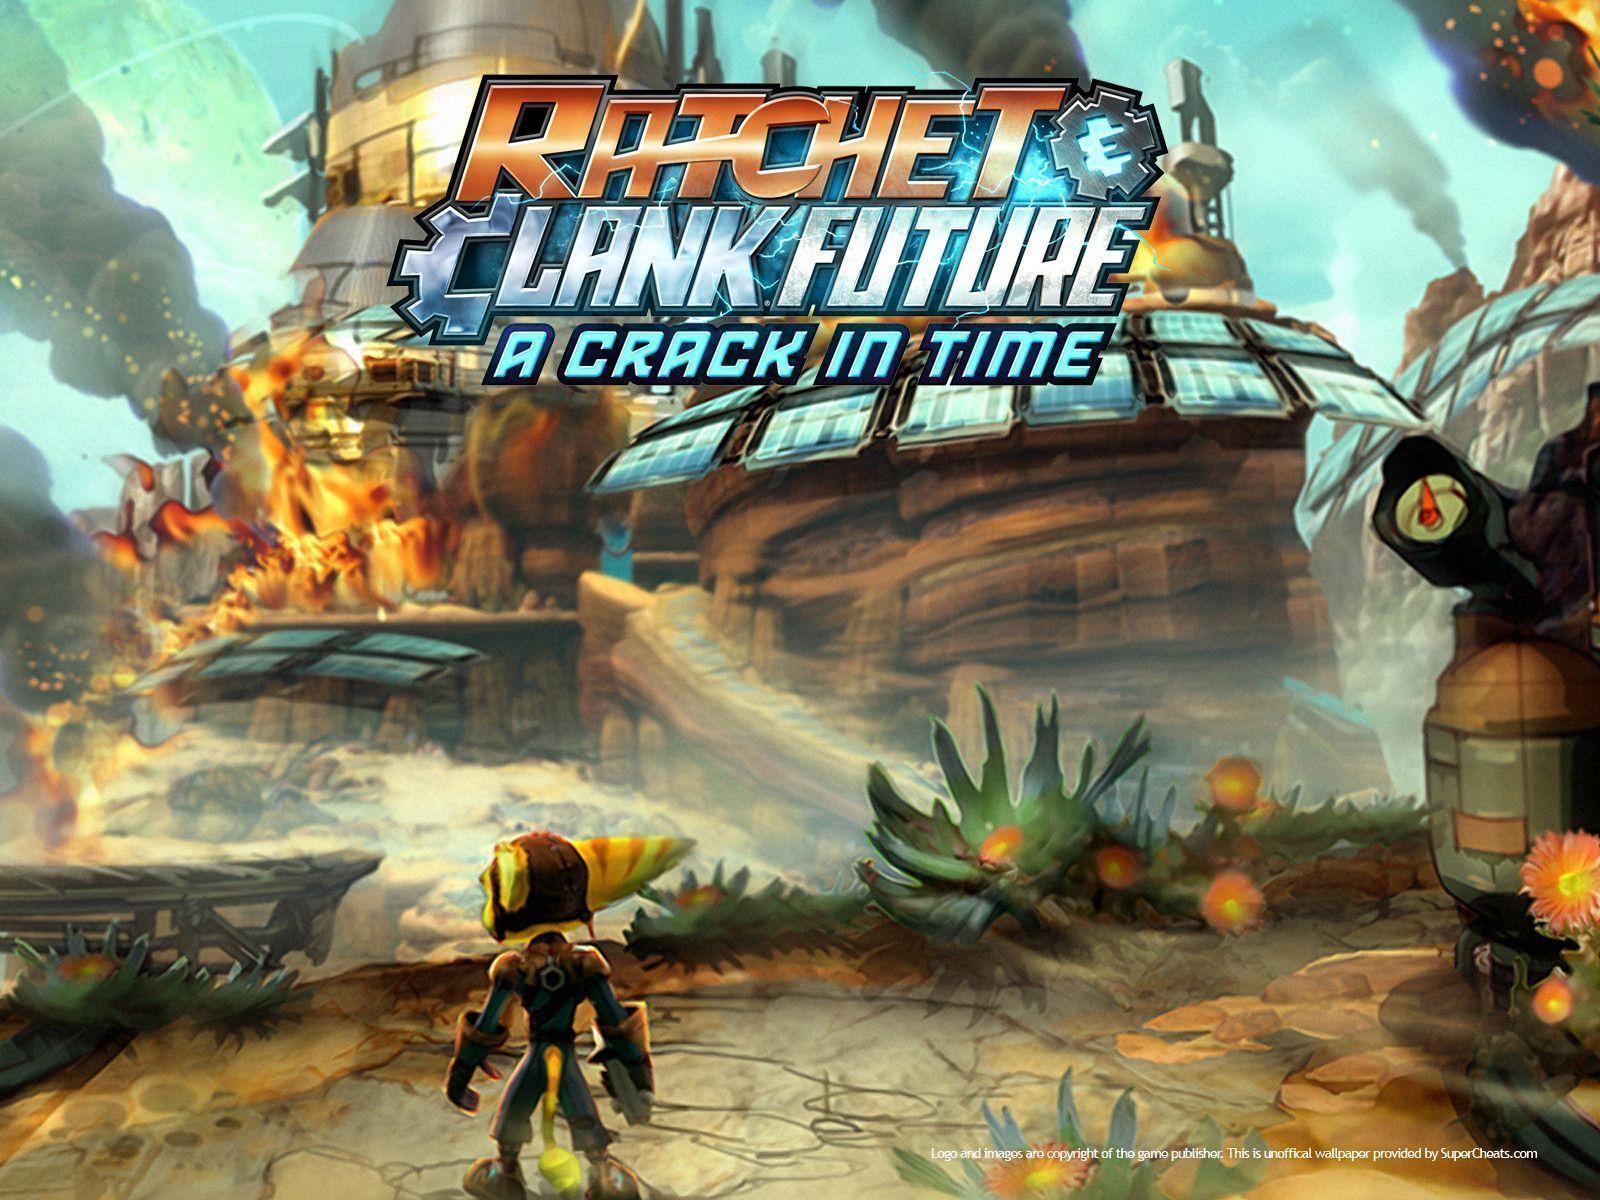 Ratchet & Clank A Crack in Time Wallpaper. HD Wallpaper Base